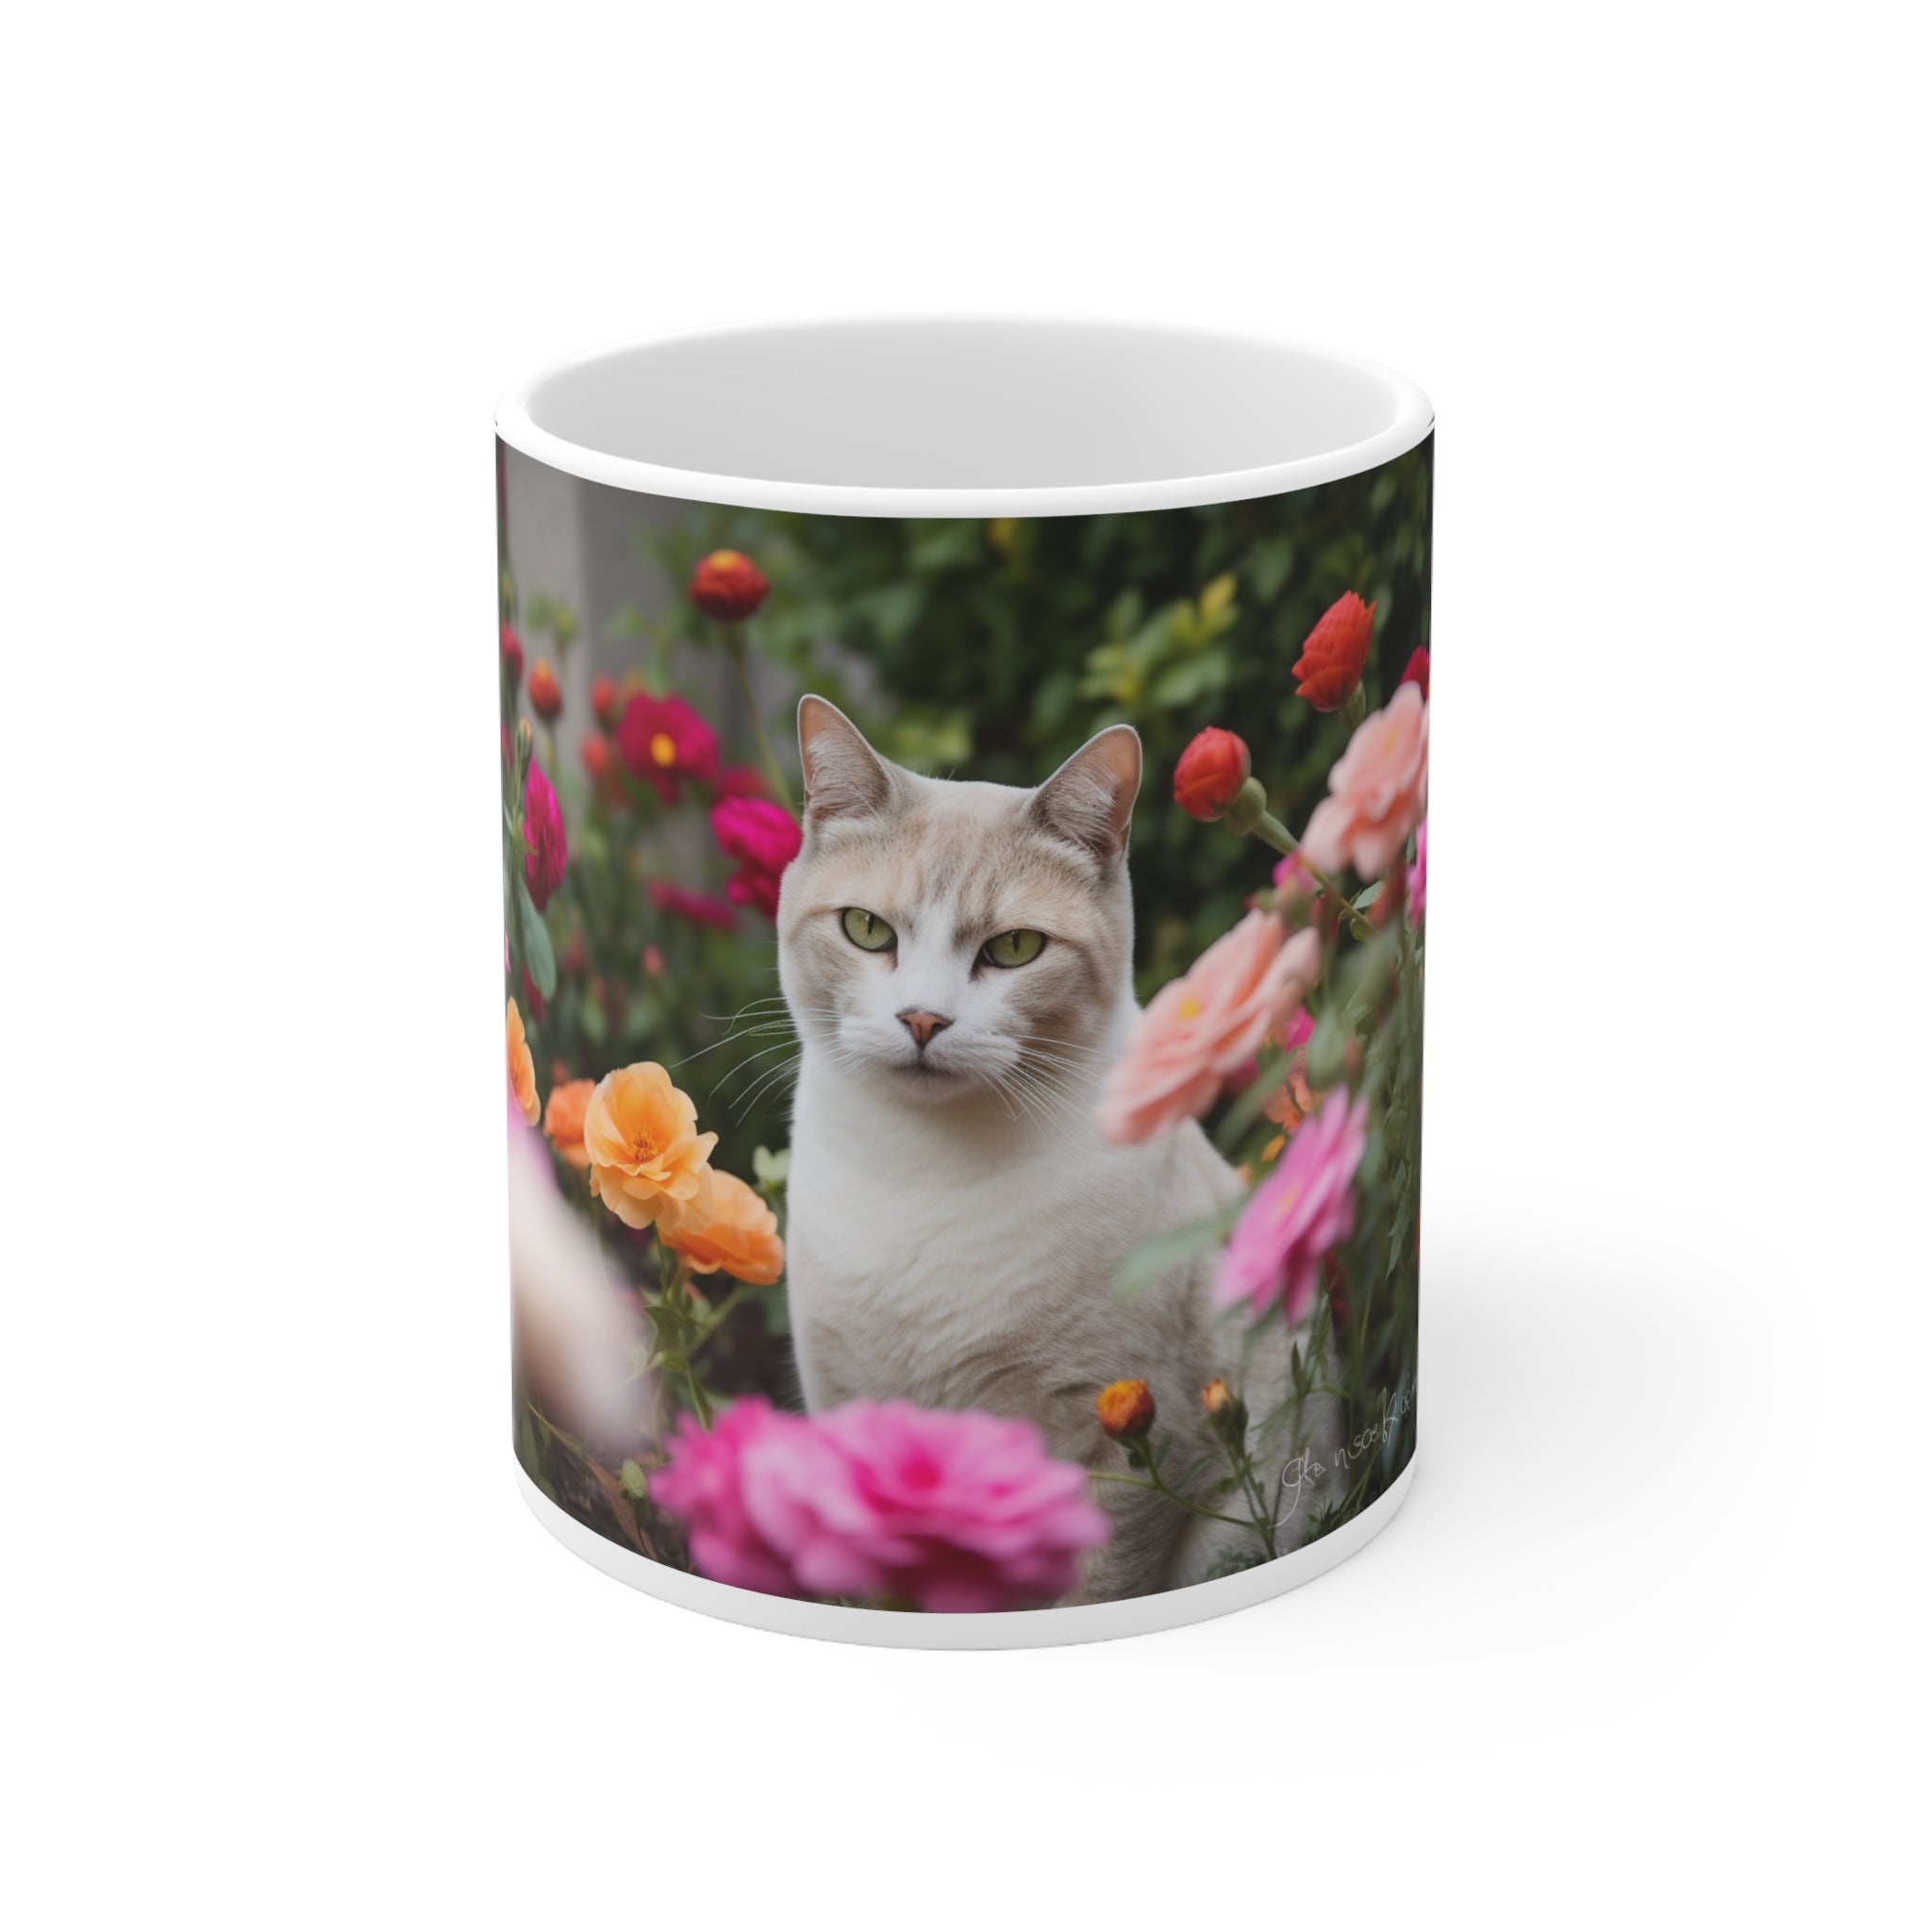 Adorable Garden Cat Feline Party Ceramic Mug 11oz - Perfect Gift for Cat Lovers & Garden Enthusiasts Gift for Pet Lovers and Cat Owners